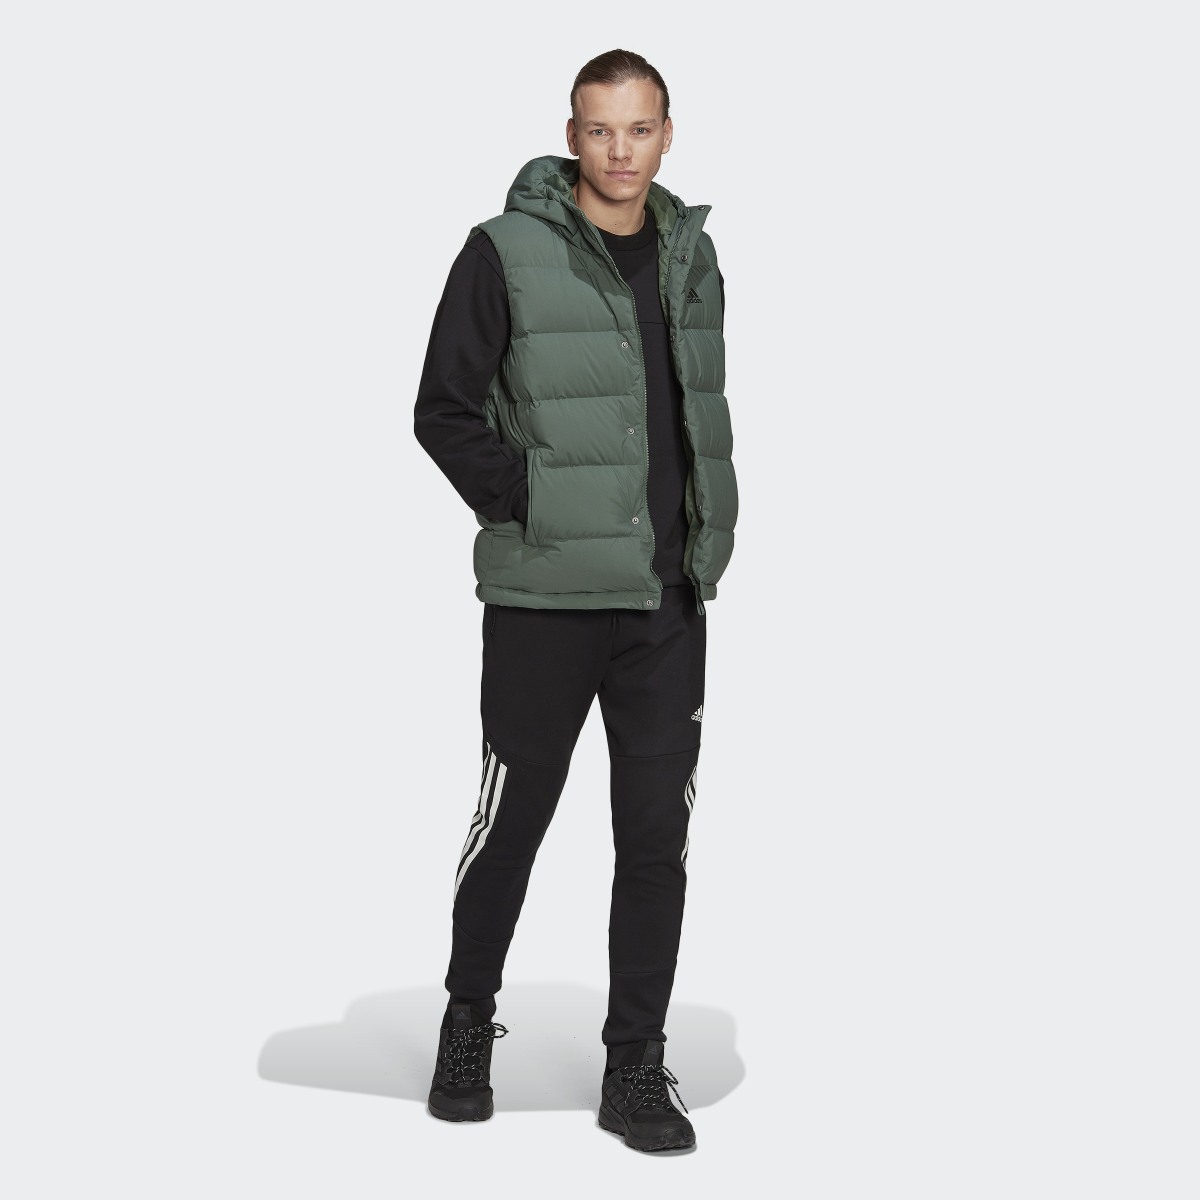 Adidas Helionic Hooded Down Vest. 6